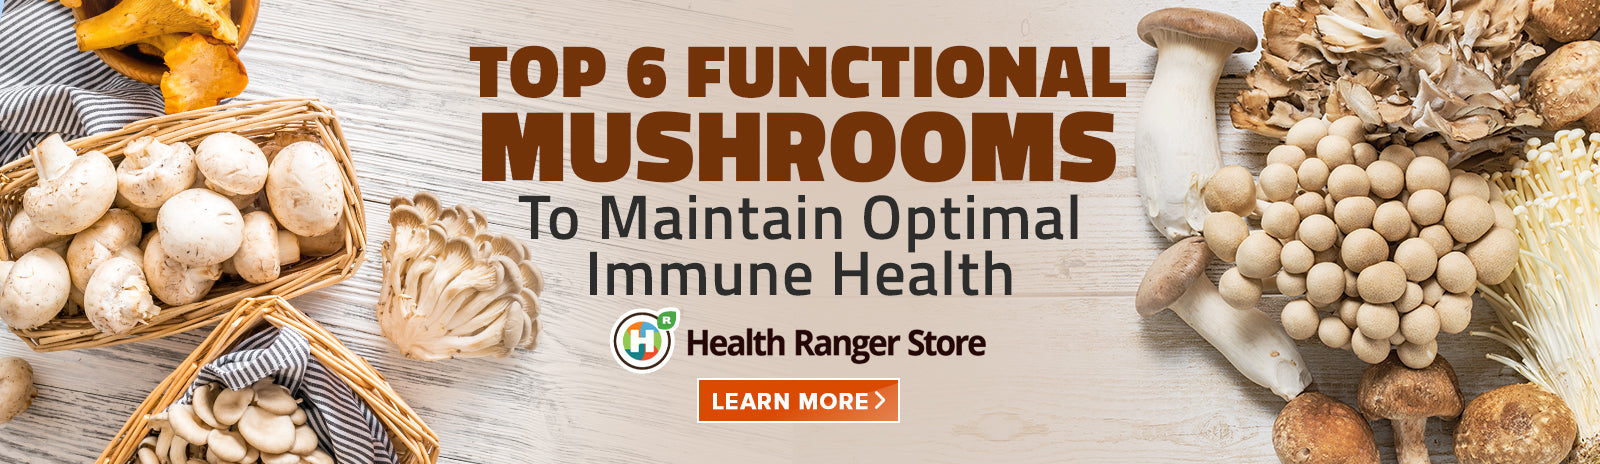 Here’s everything you need to know about functional mushrooms and their powerful immune supporting abilities